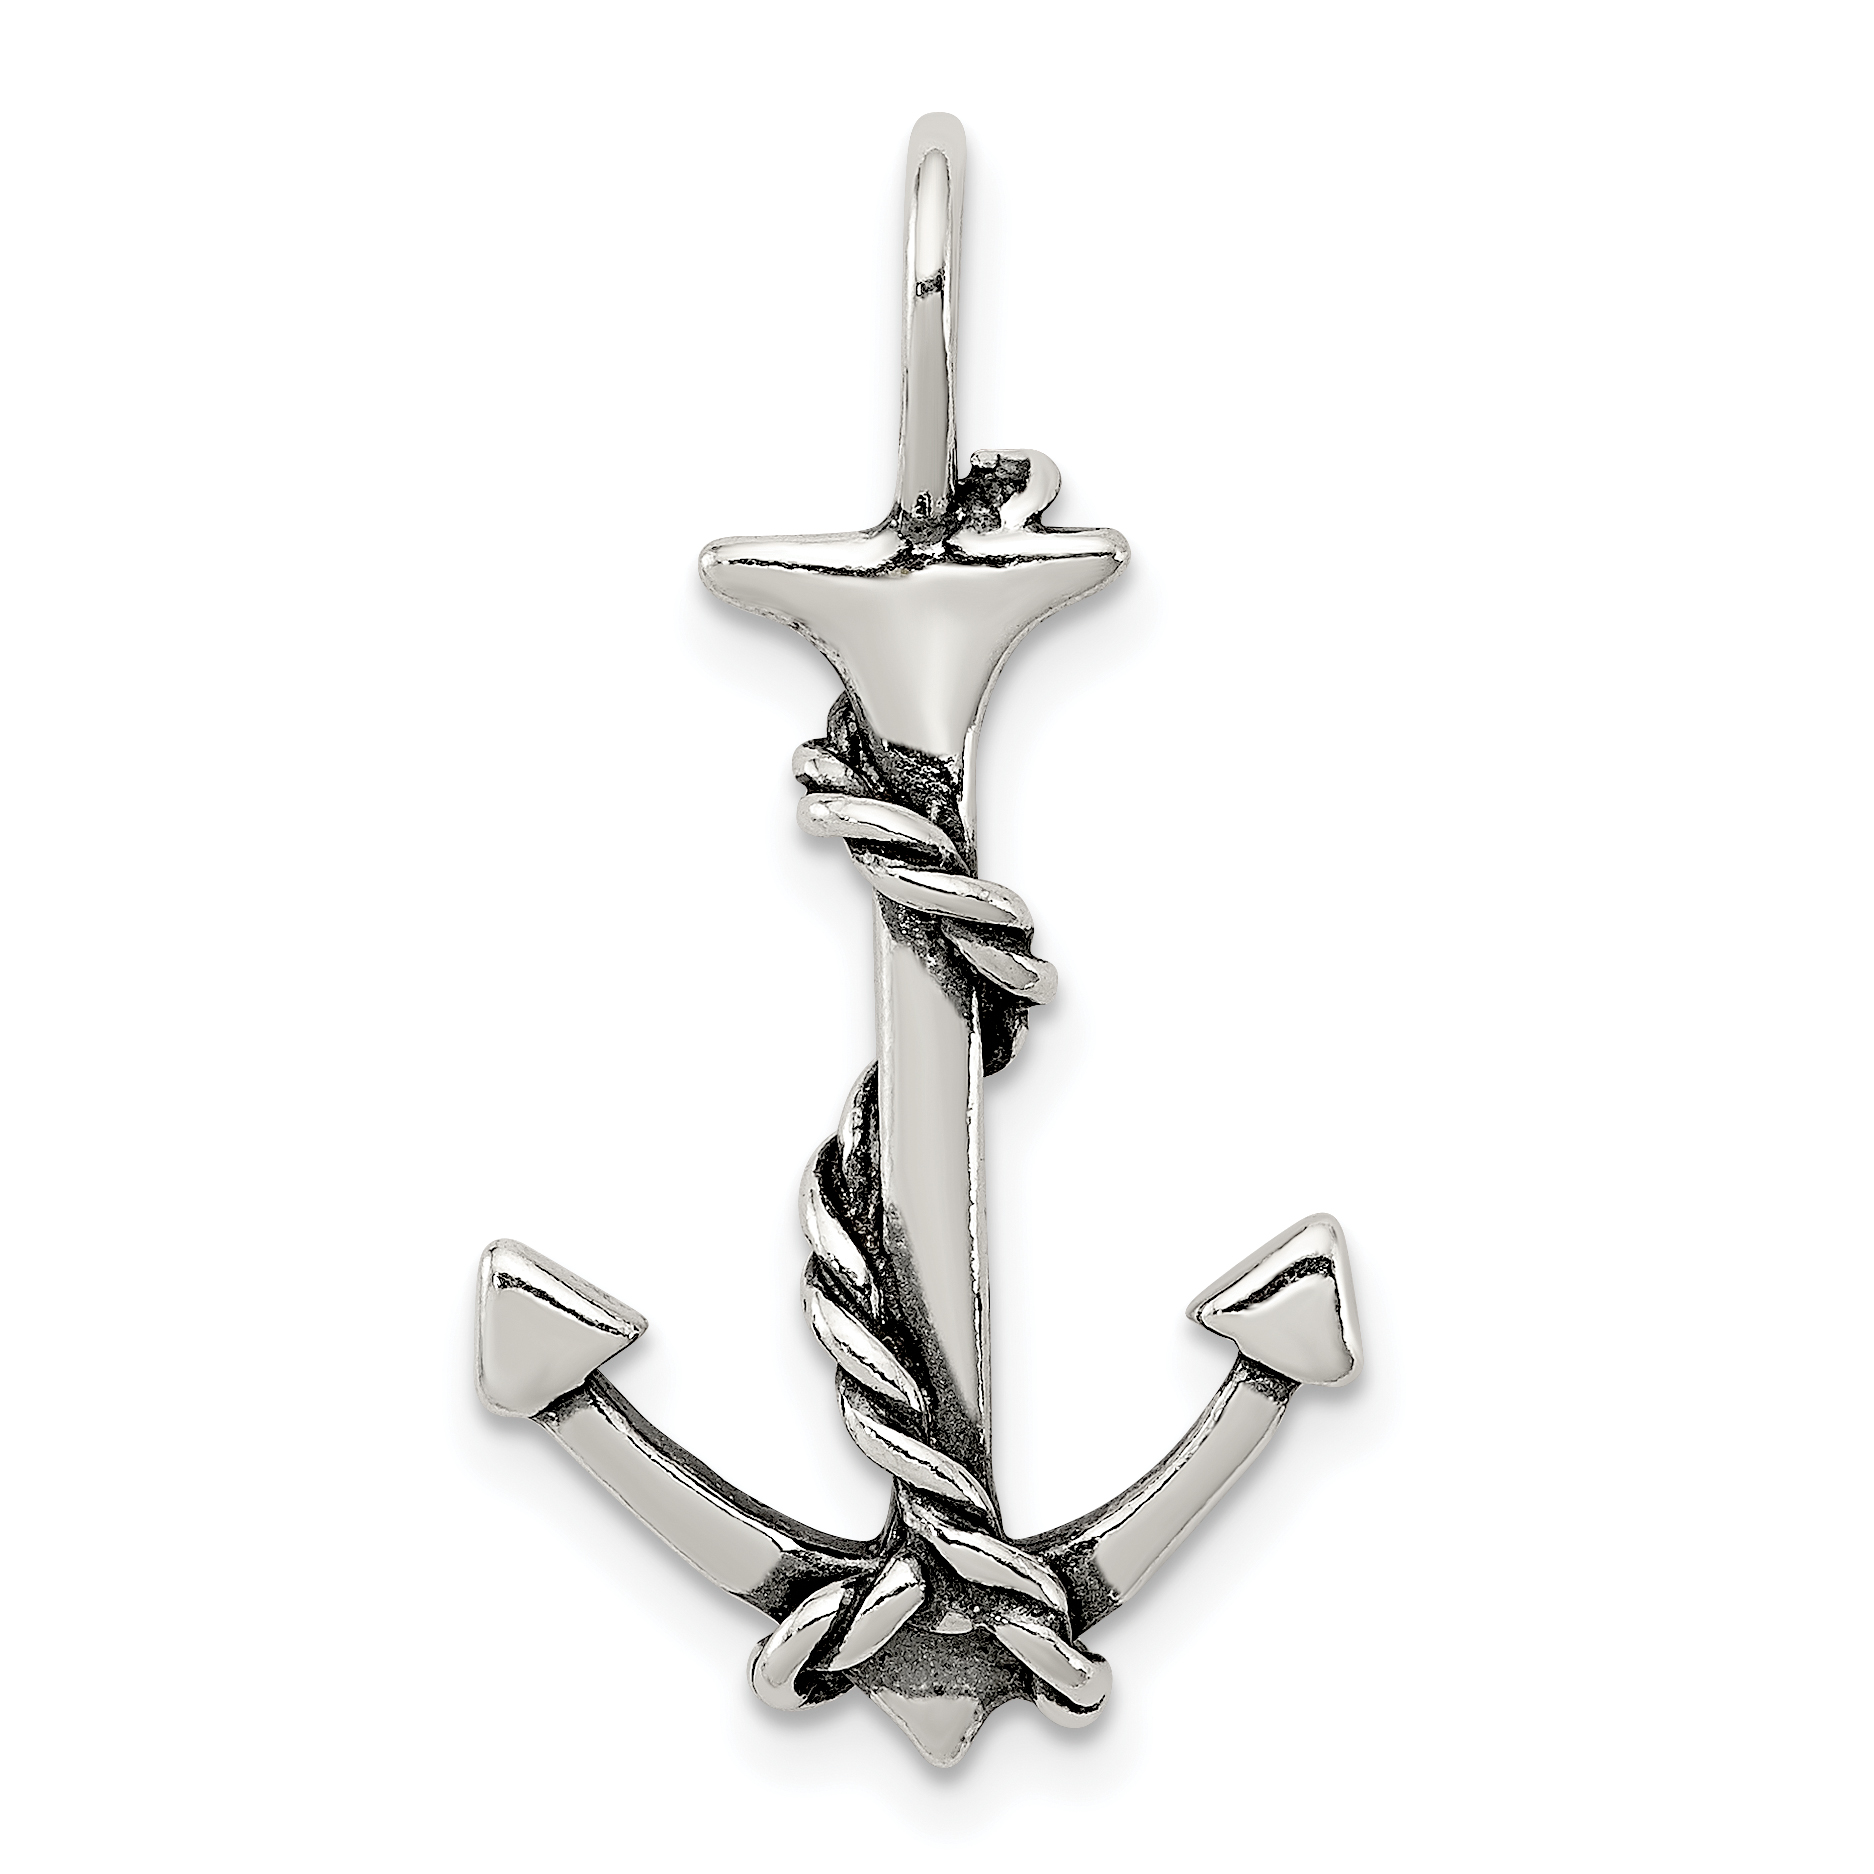 Anchor Sterling Silver Charm Necklace  Gifts for her  Nautical jewelry  Everyday necklace